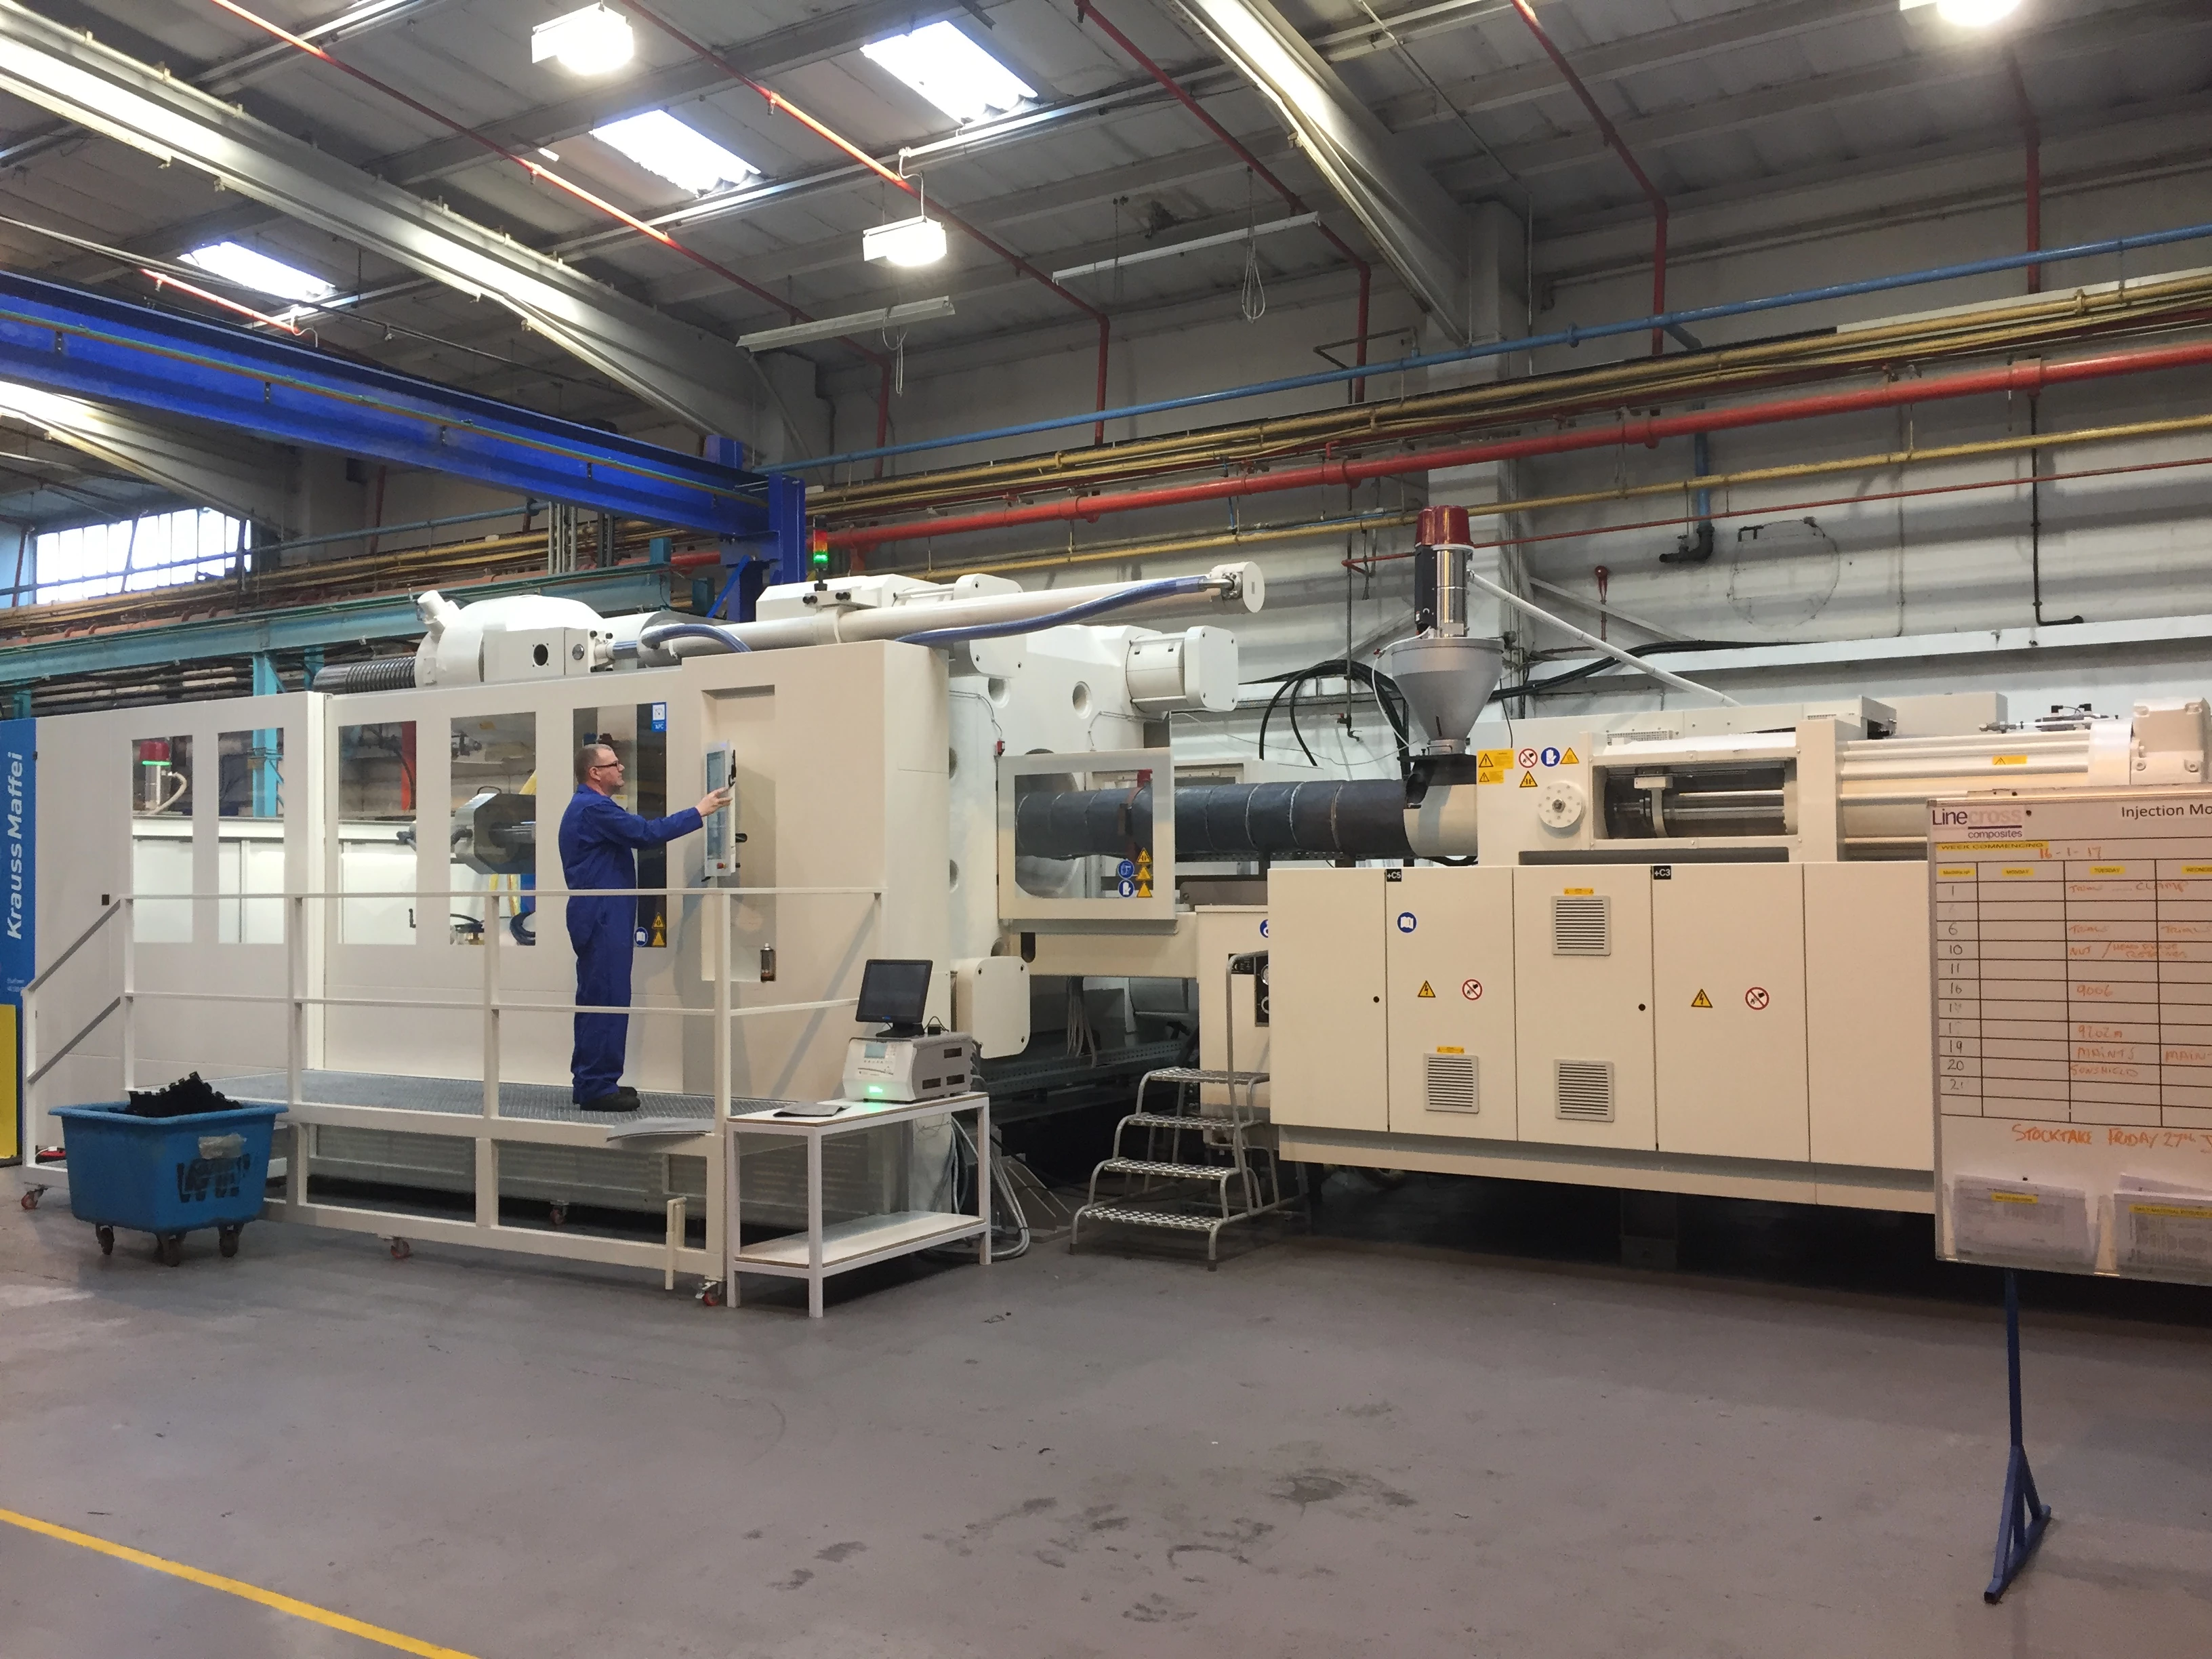 The new Krauss Maffei 2300 tonne injection moulding machine at Linecross